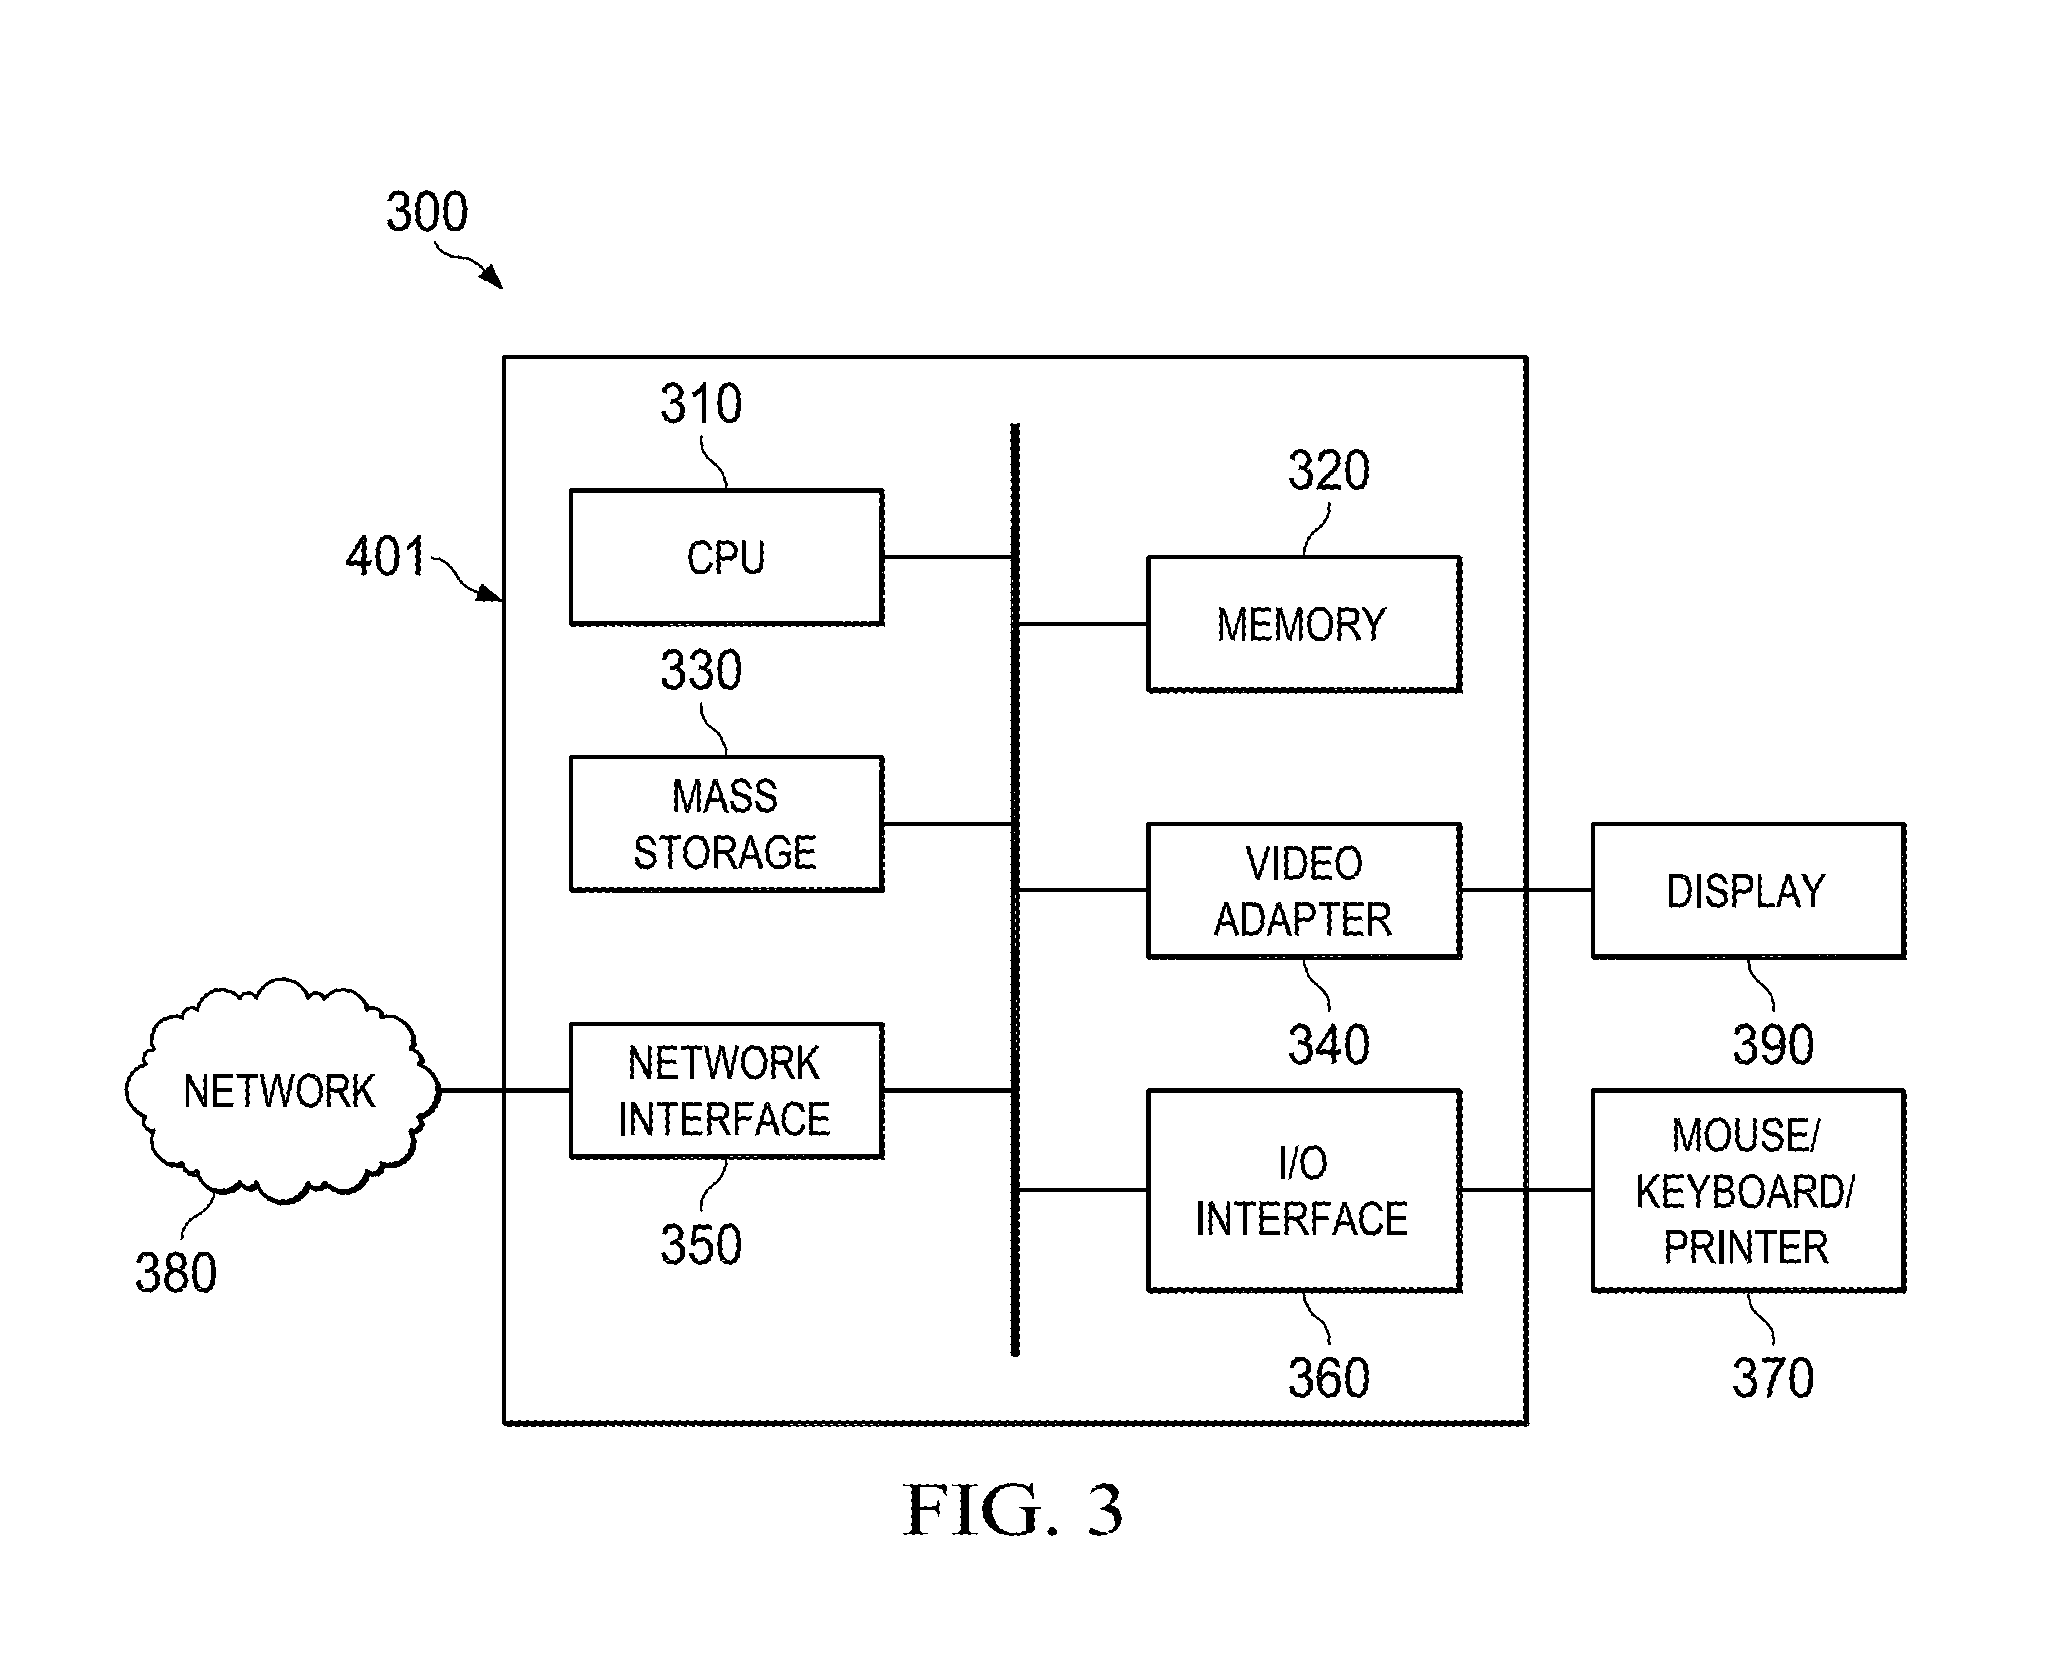 System and Method for Software/Hardware Coordinated Adaptive Performance Monitoring